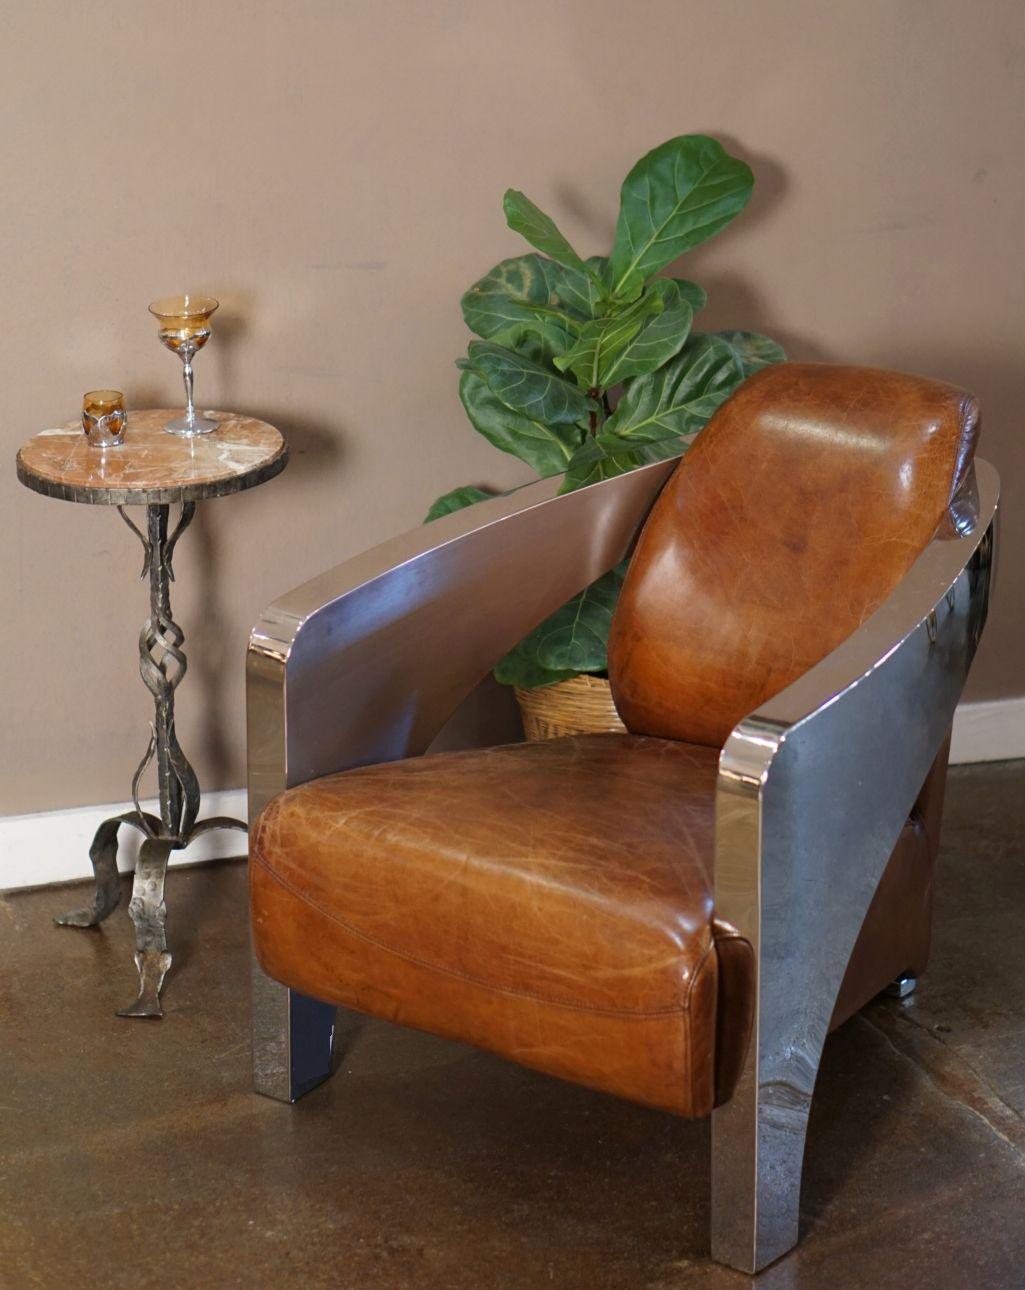 A pair of handsome and comfortable French club or aviator lounge chairs upholstered in a cognac or tobacco brown leather - each chair featuring Art Deco styling in the chromed round metal sides and arms and Jazz-era club chair design in the leather